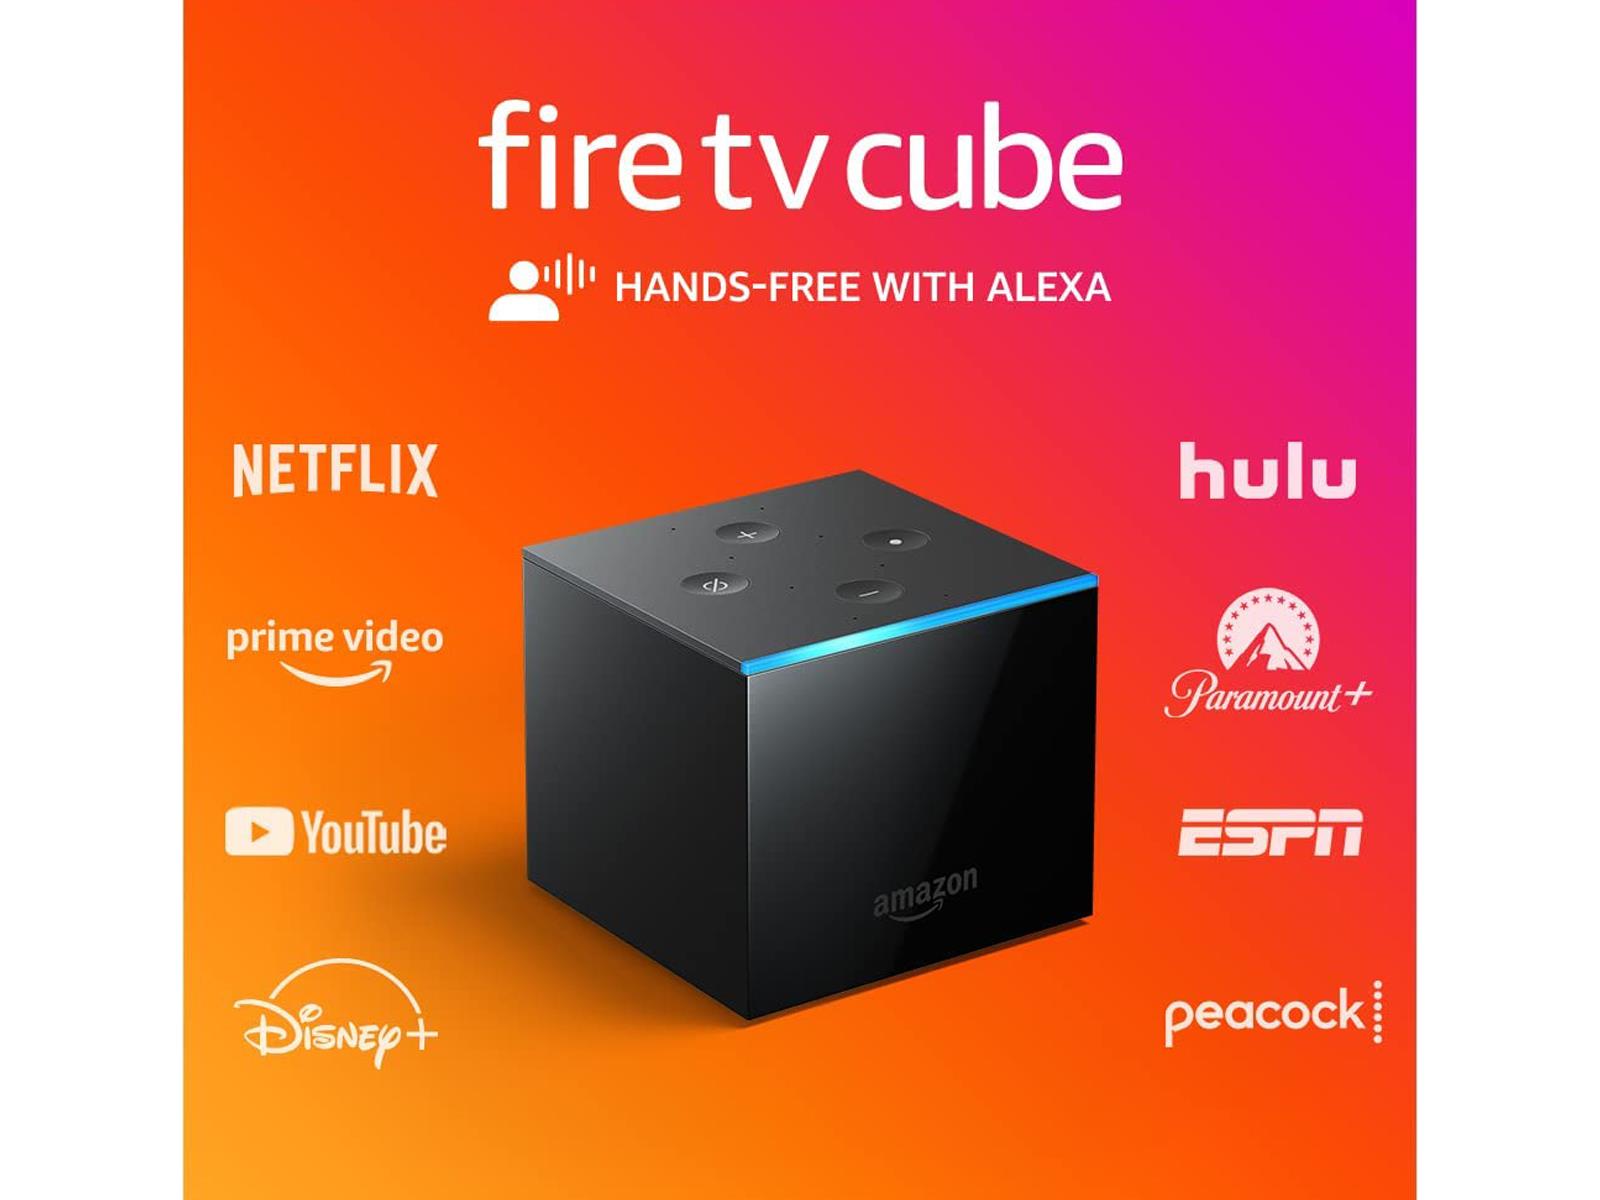 Image shows streaming information for the Amazon Fire TV Cube